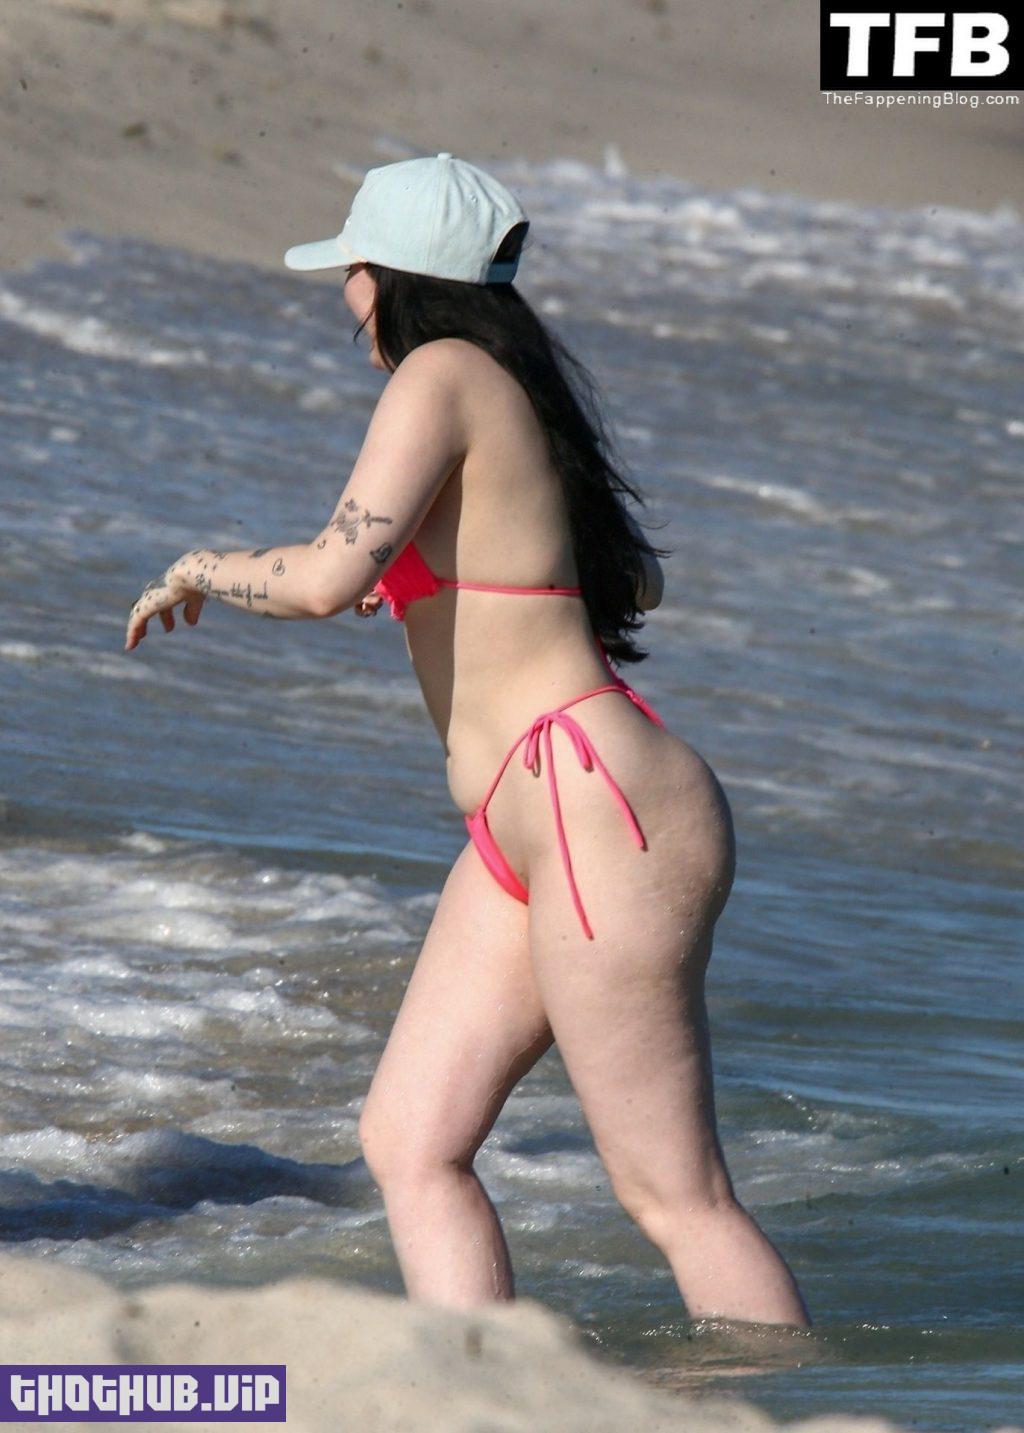 Noah Cyrus Sexy The Fappening Blog 1